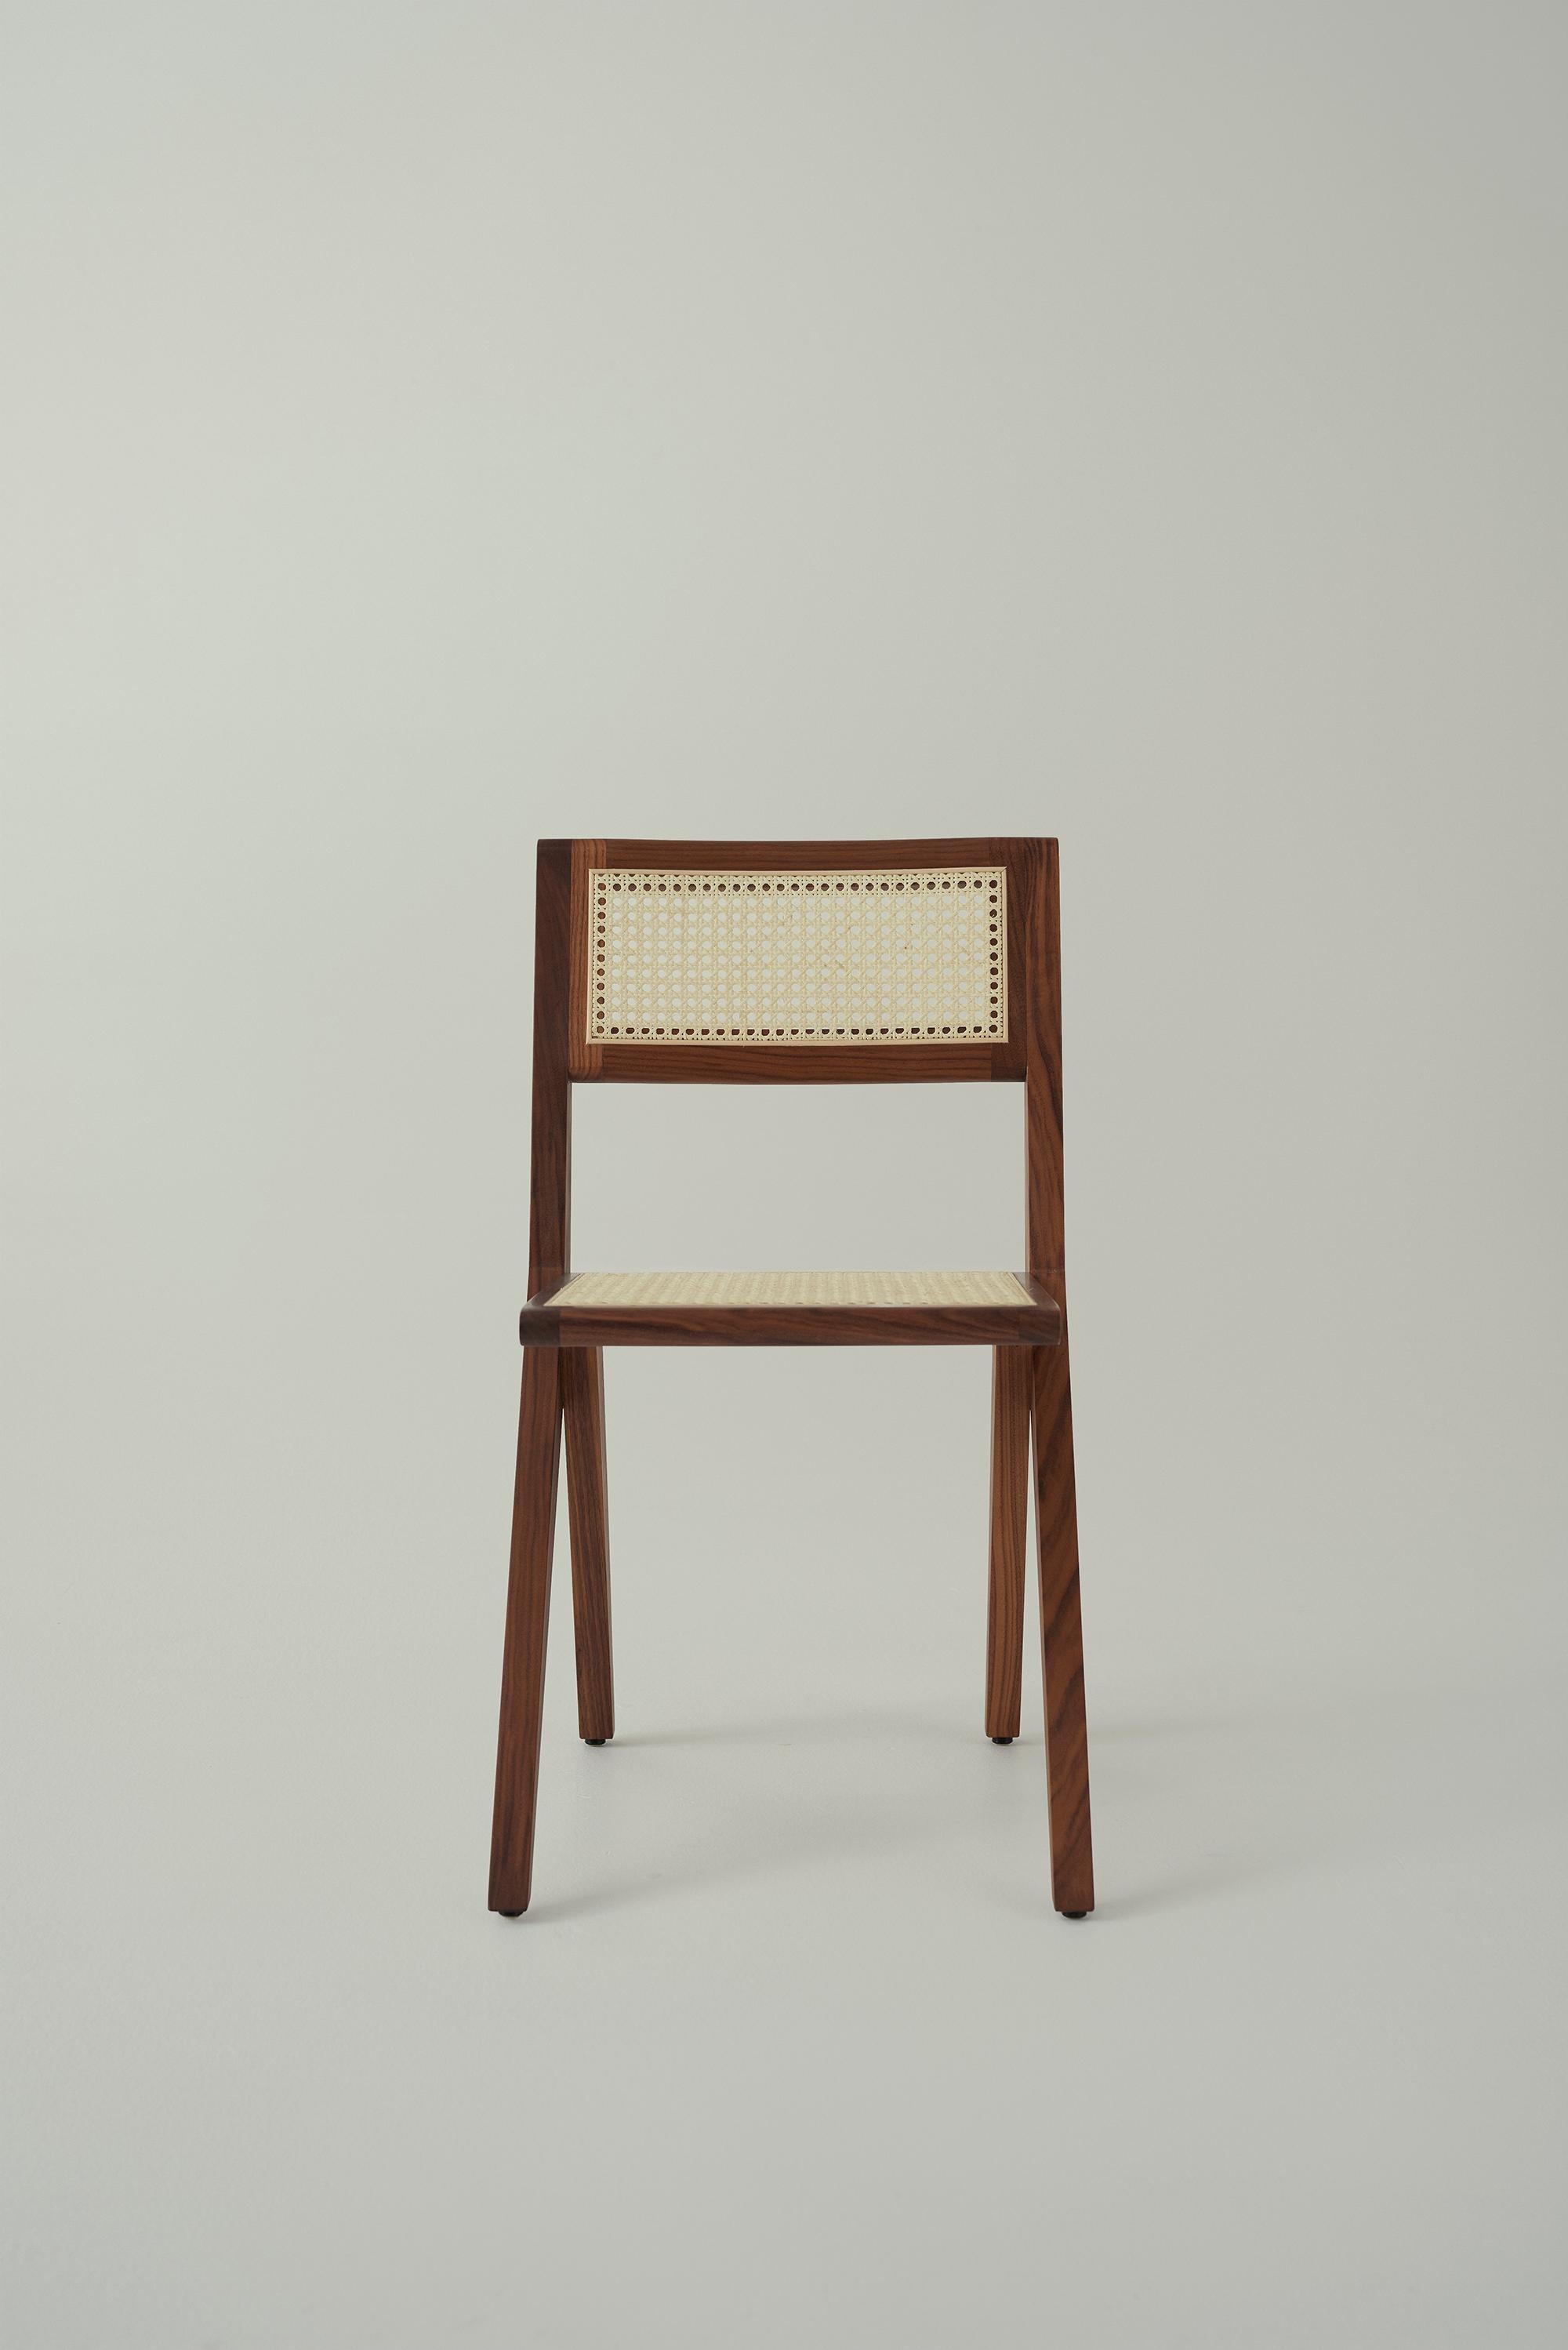 In the spirit of early Brazilian modernism, the Lina chair is an elegant combination of the primitive and contemporary. With a tapered structure and form composed of long lines and cantilevers, the rattan backrest and seat brings comfort and